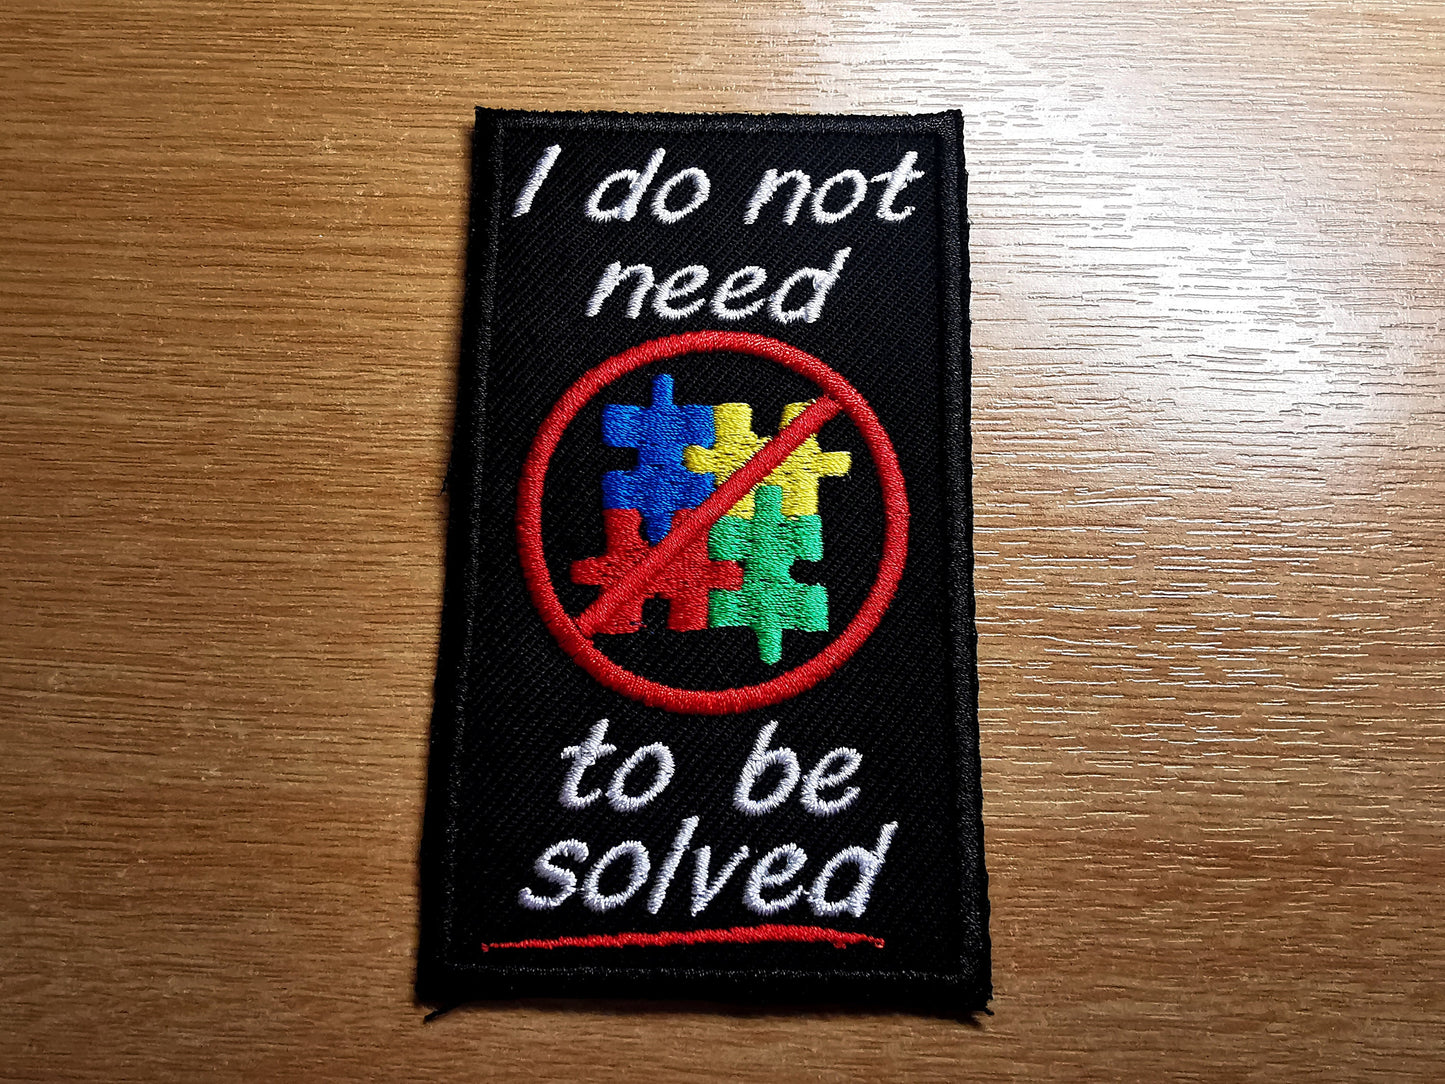 I Do Not Need to Be Solved Autism Embroidered Patch